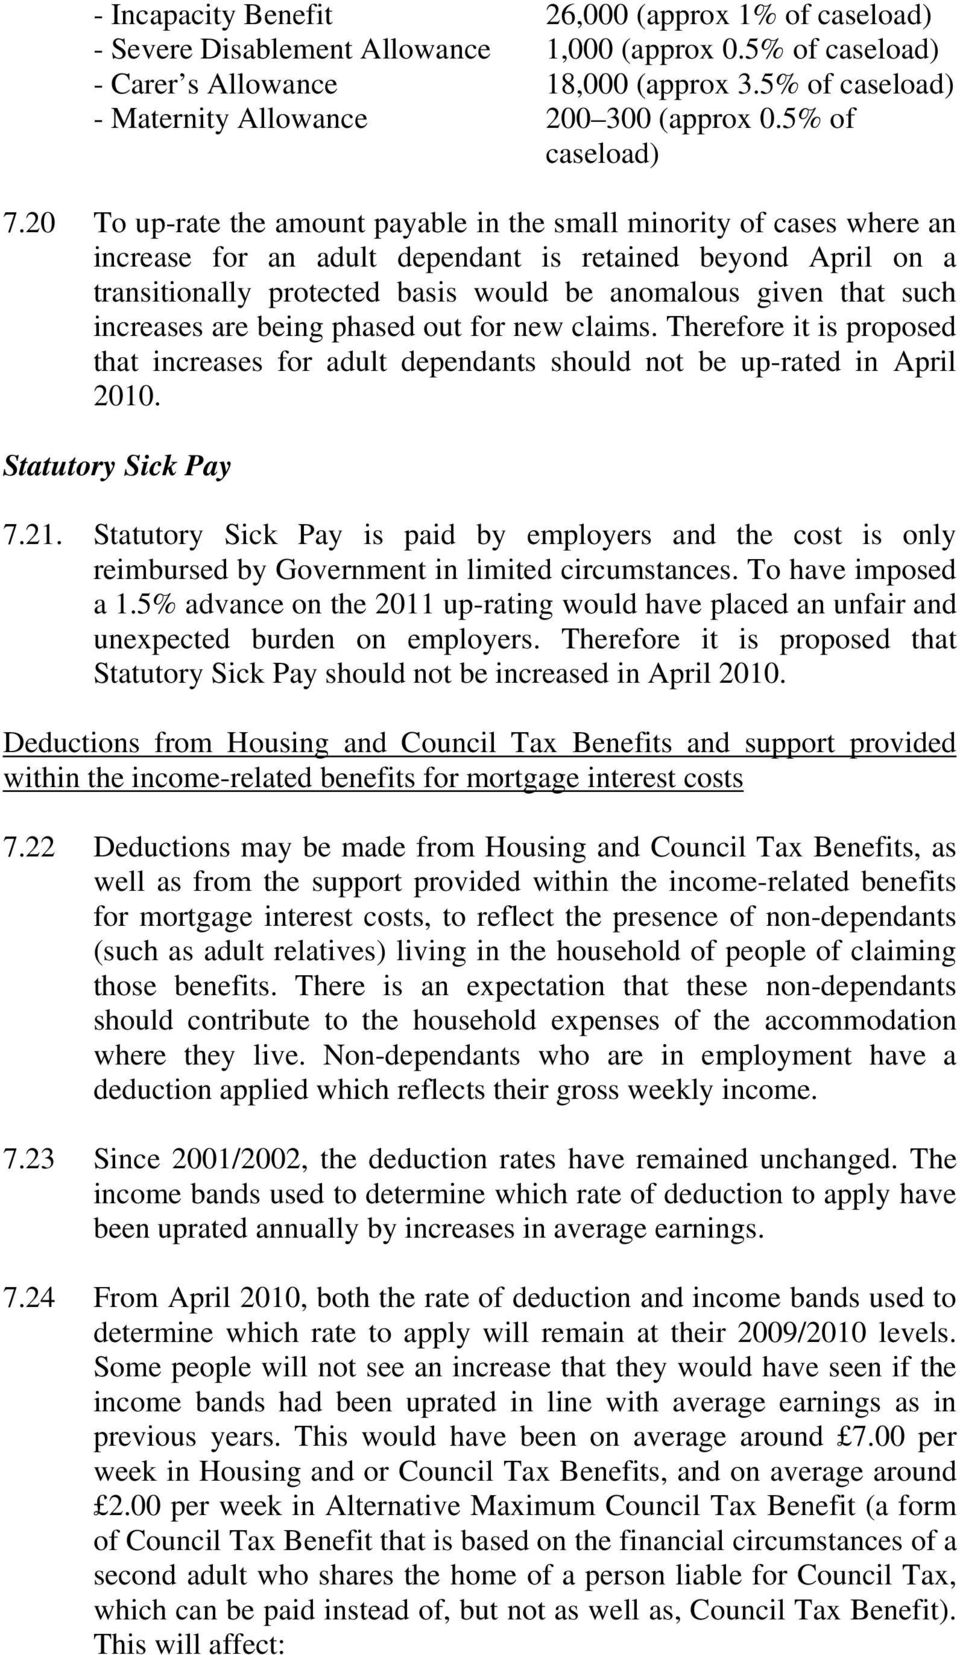 20 To up-rate the amount payable in the small minority of cases where an increase for an adult dependant is retained beyond April on a transitionally protected basis would be anomalous given that